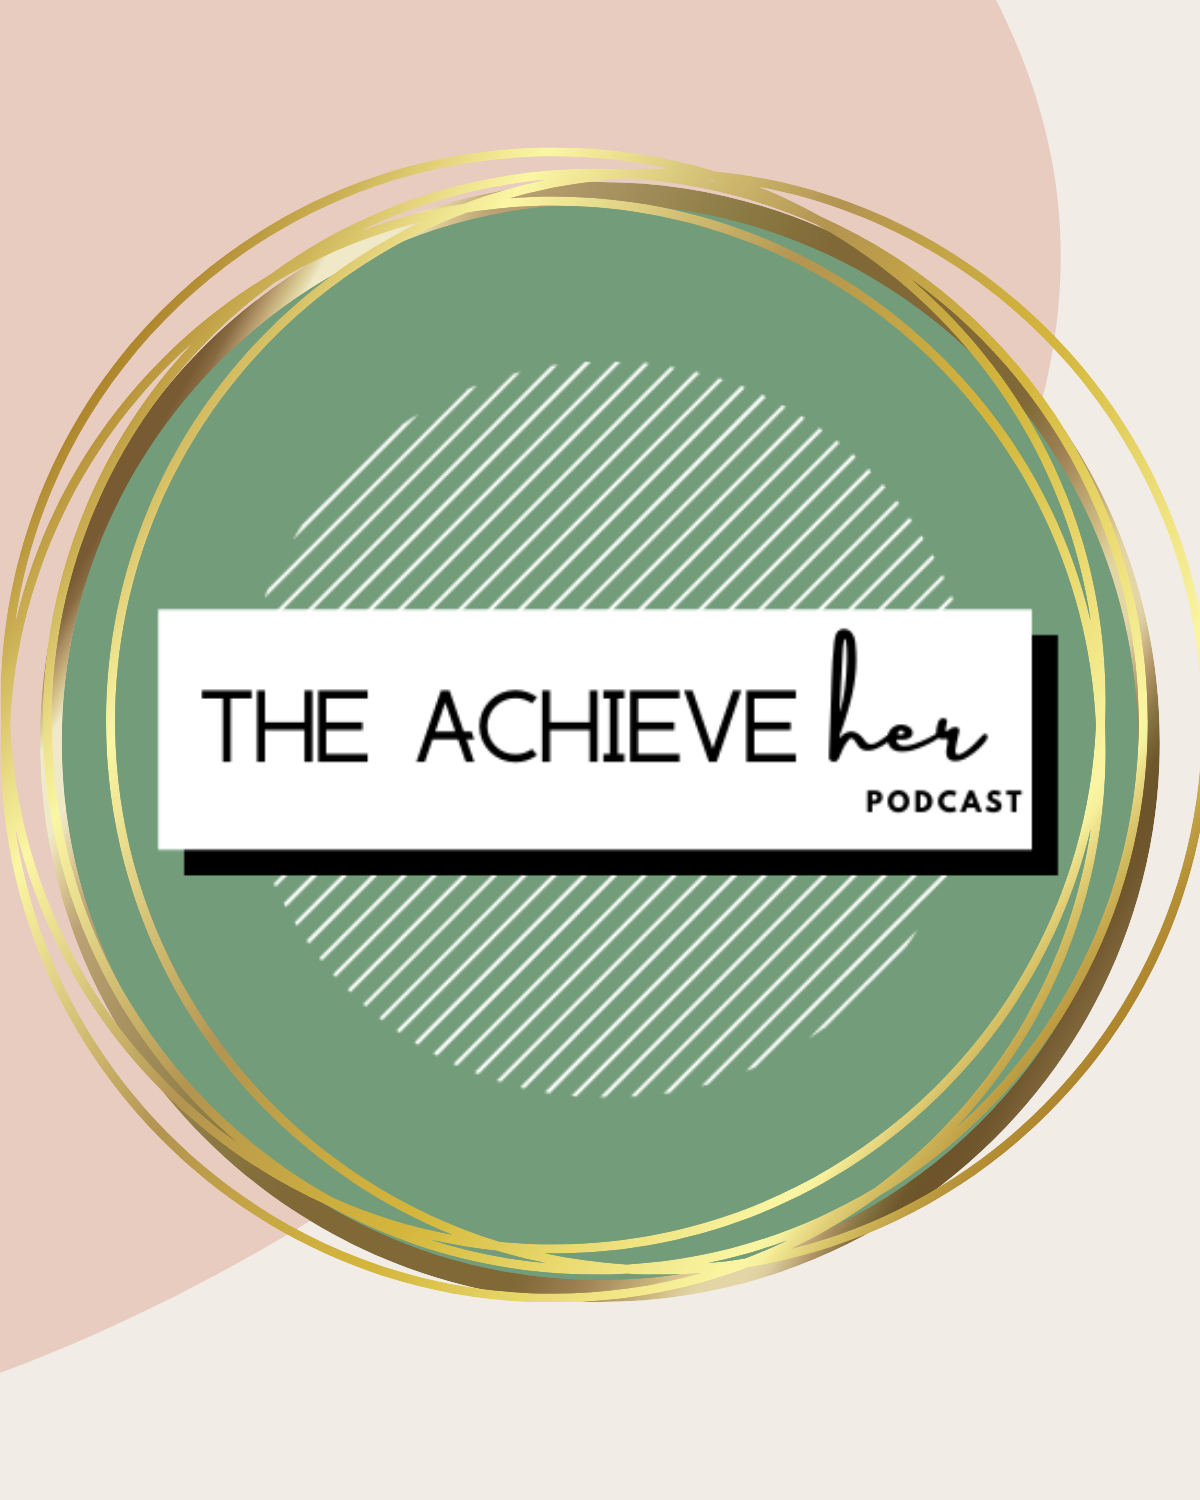 Achieve her podcast image